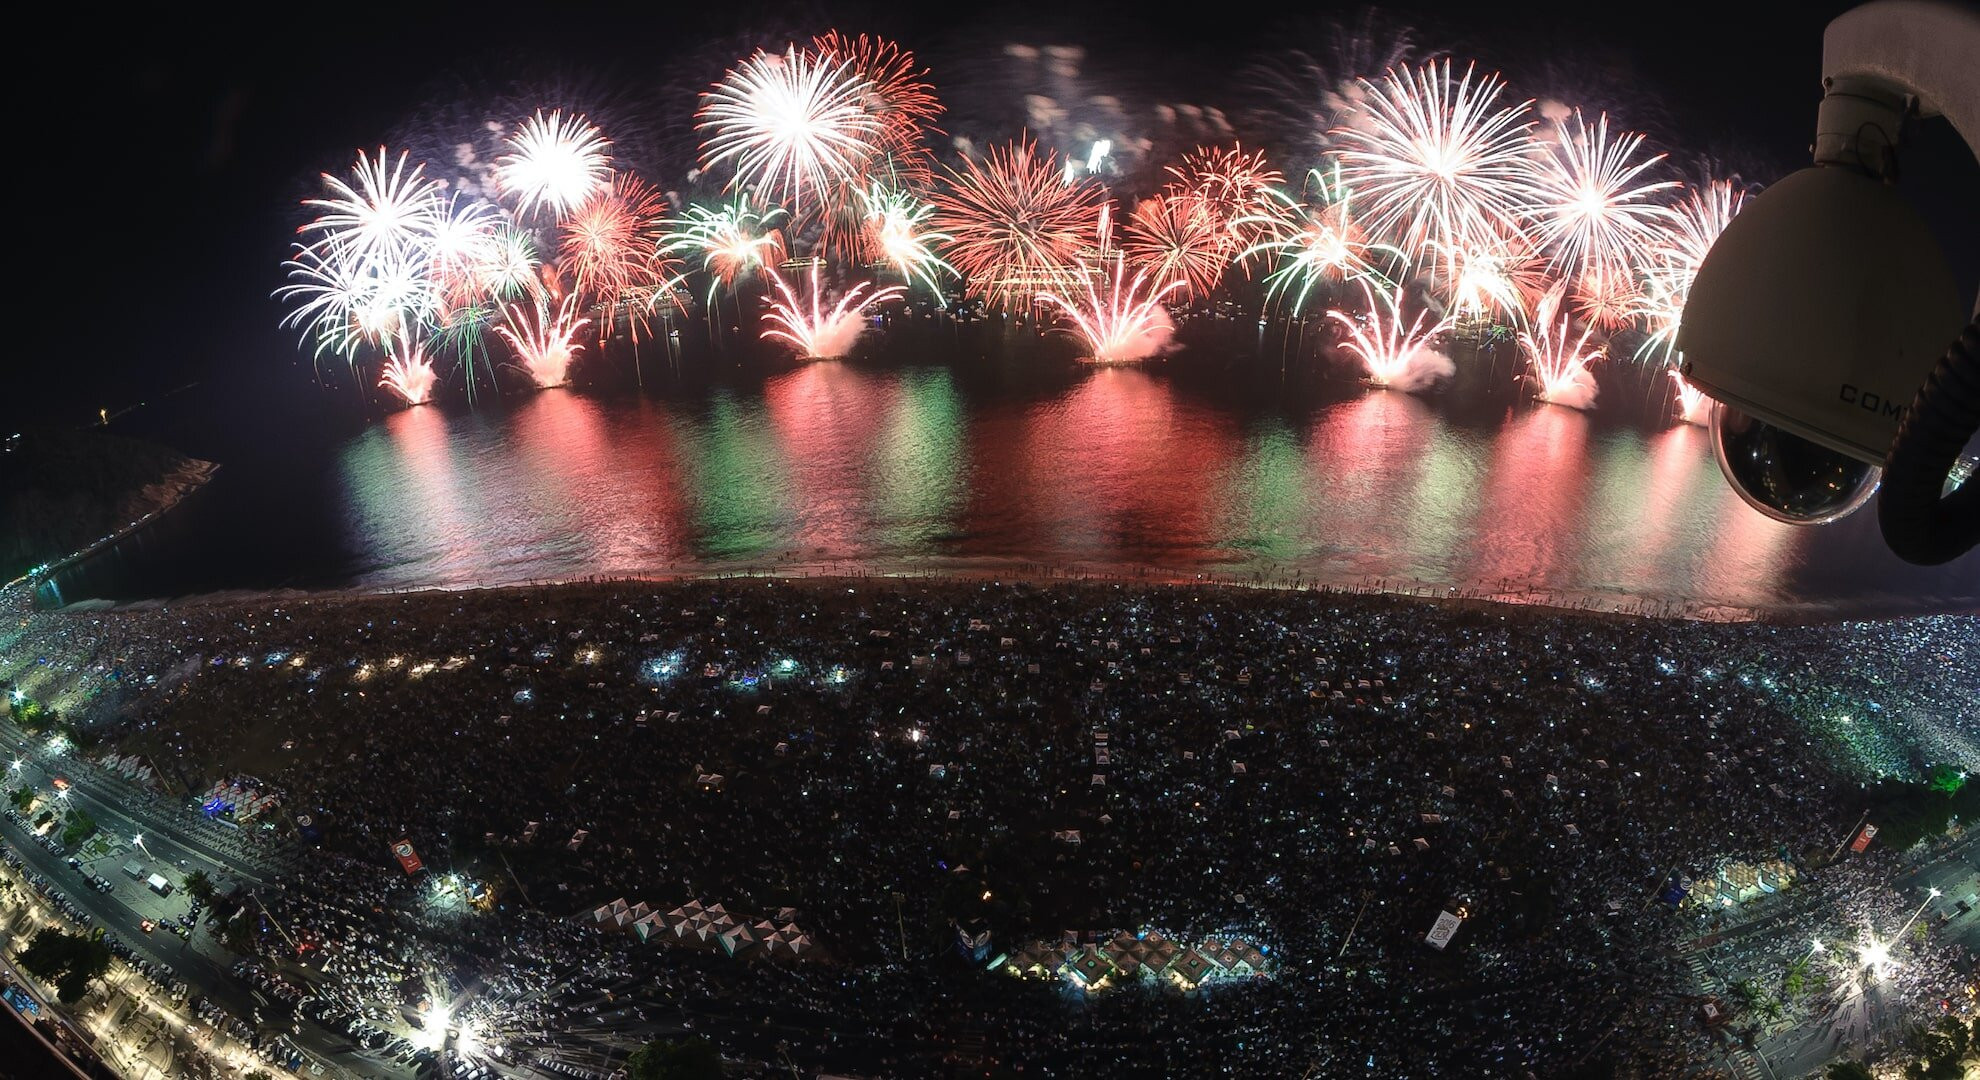 New Year celebrations in Rio